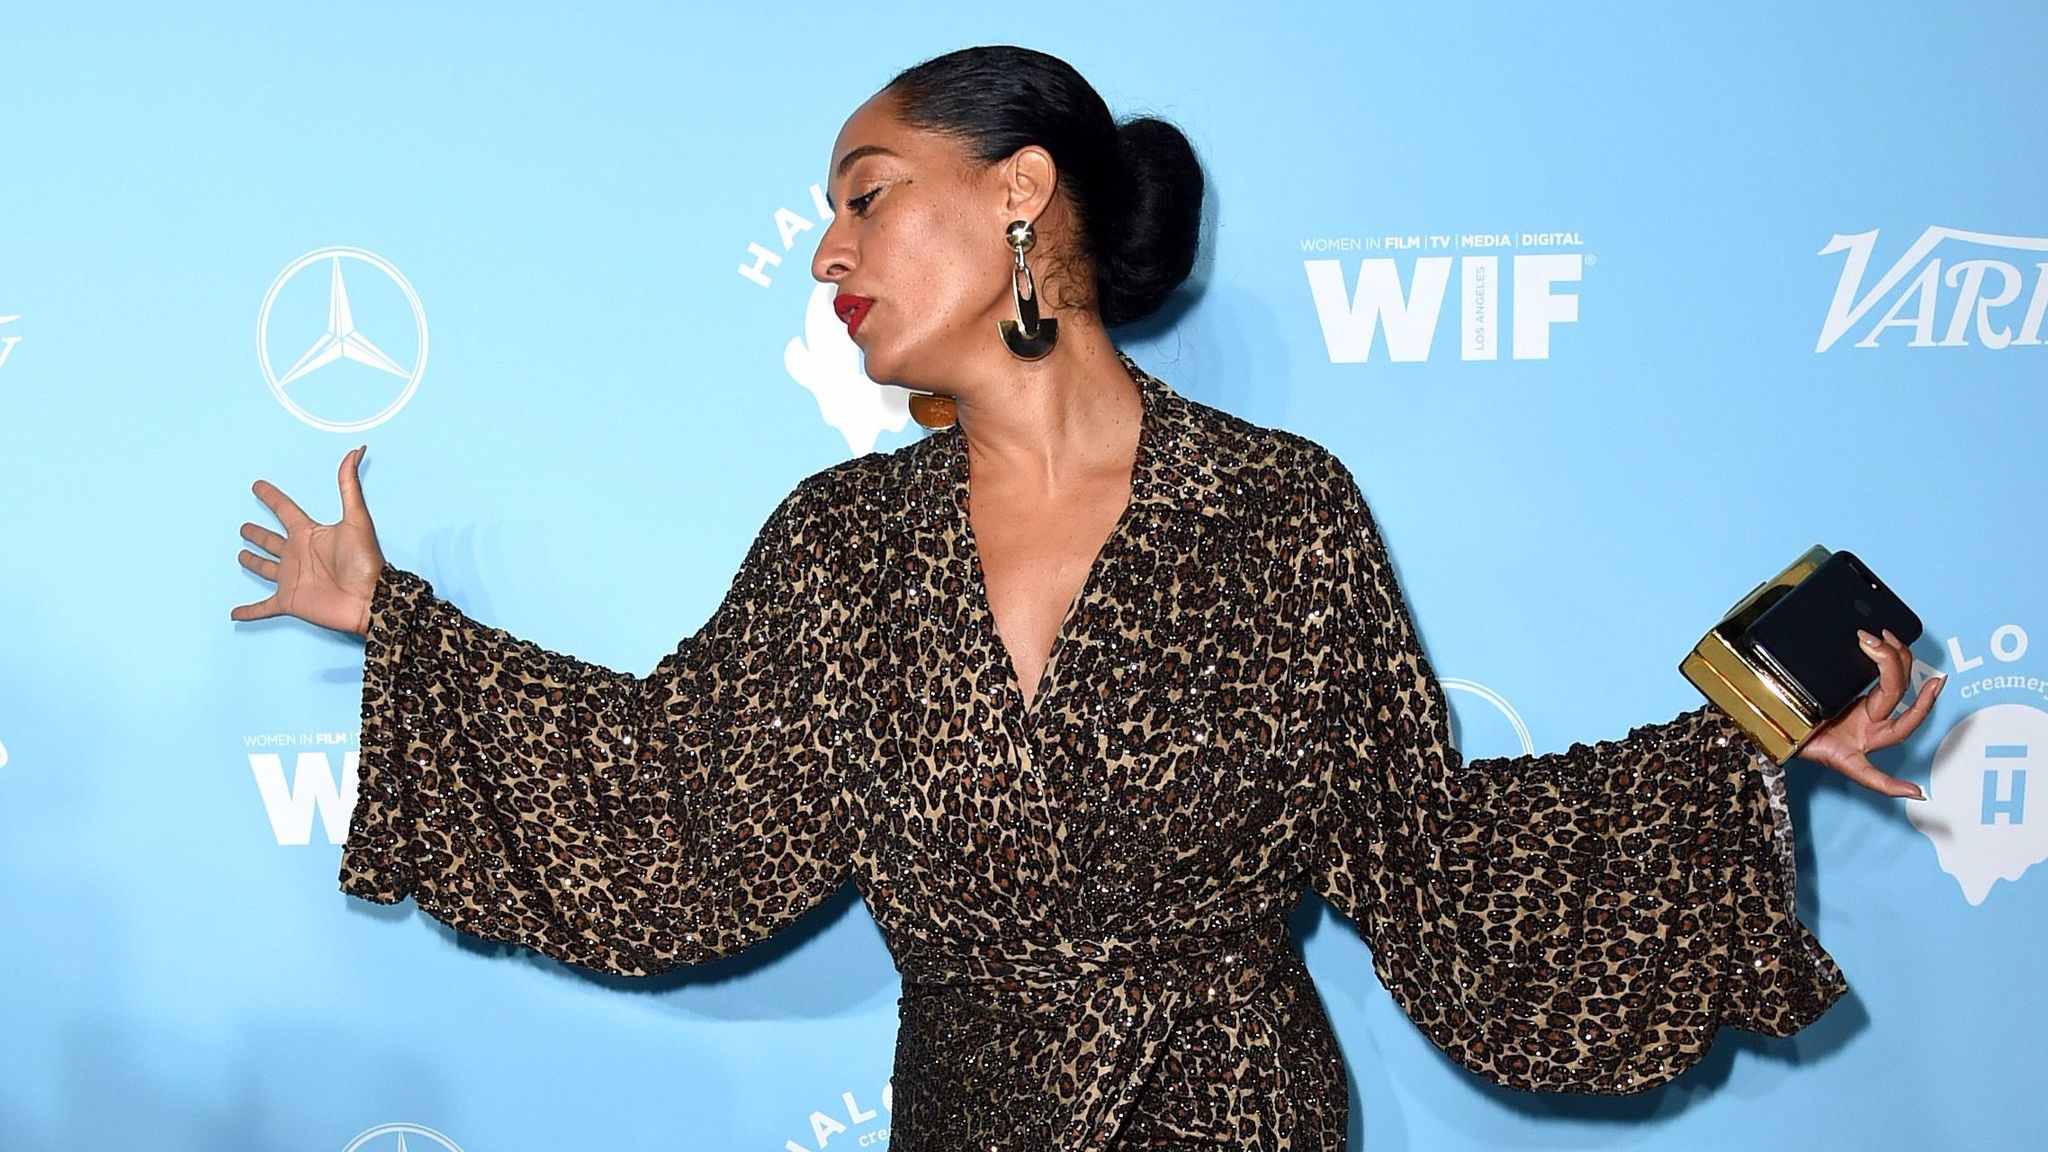 Emmy contender Tracee Ellis Ross is one of the stars at the annual nominees party who shared her thoughts on how Sunday's awards will turn out. (Richard Shotwell / Variety)